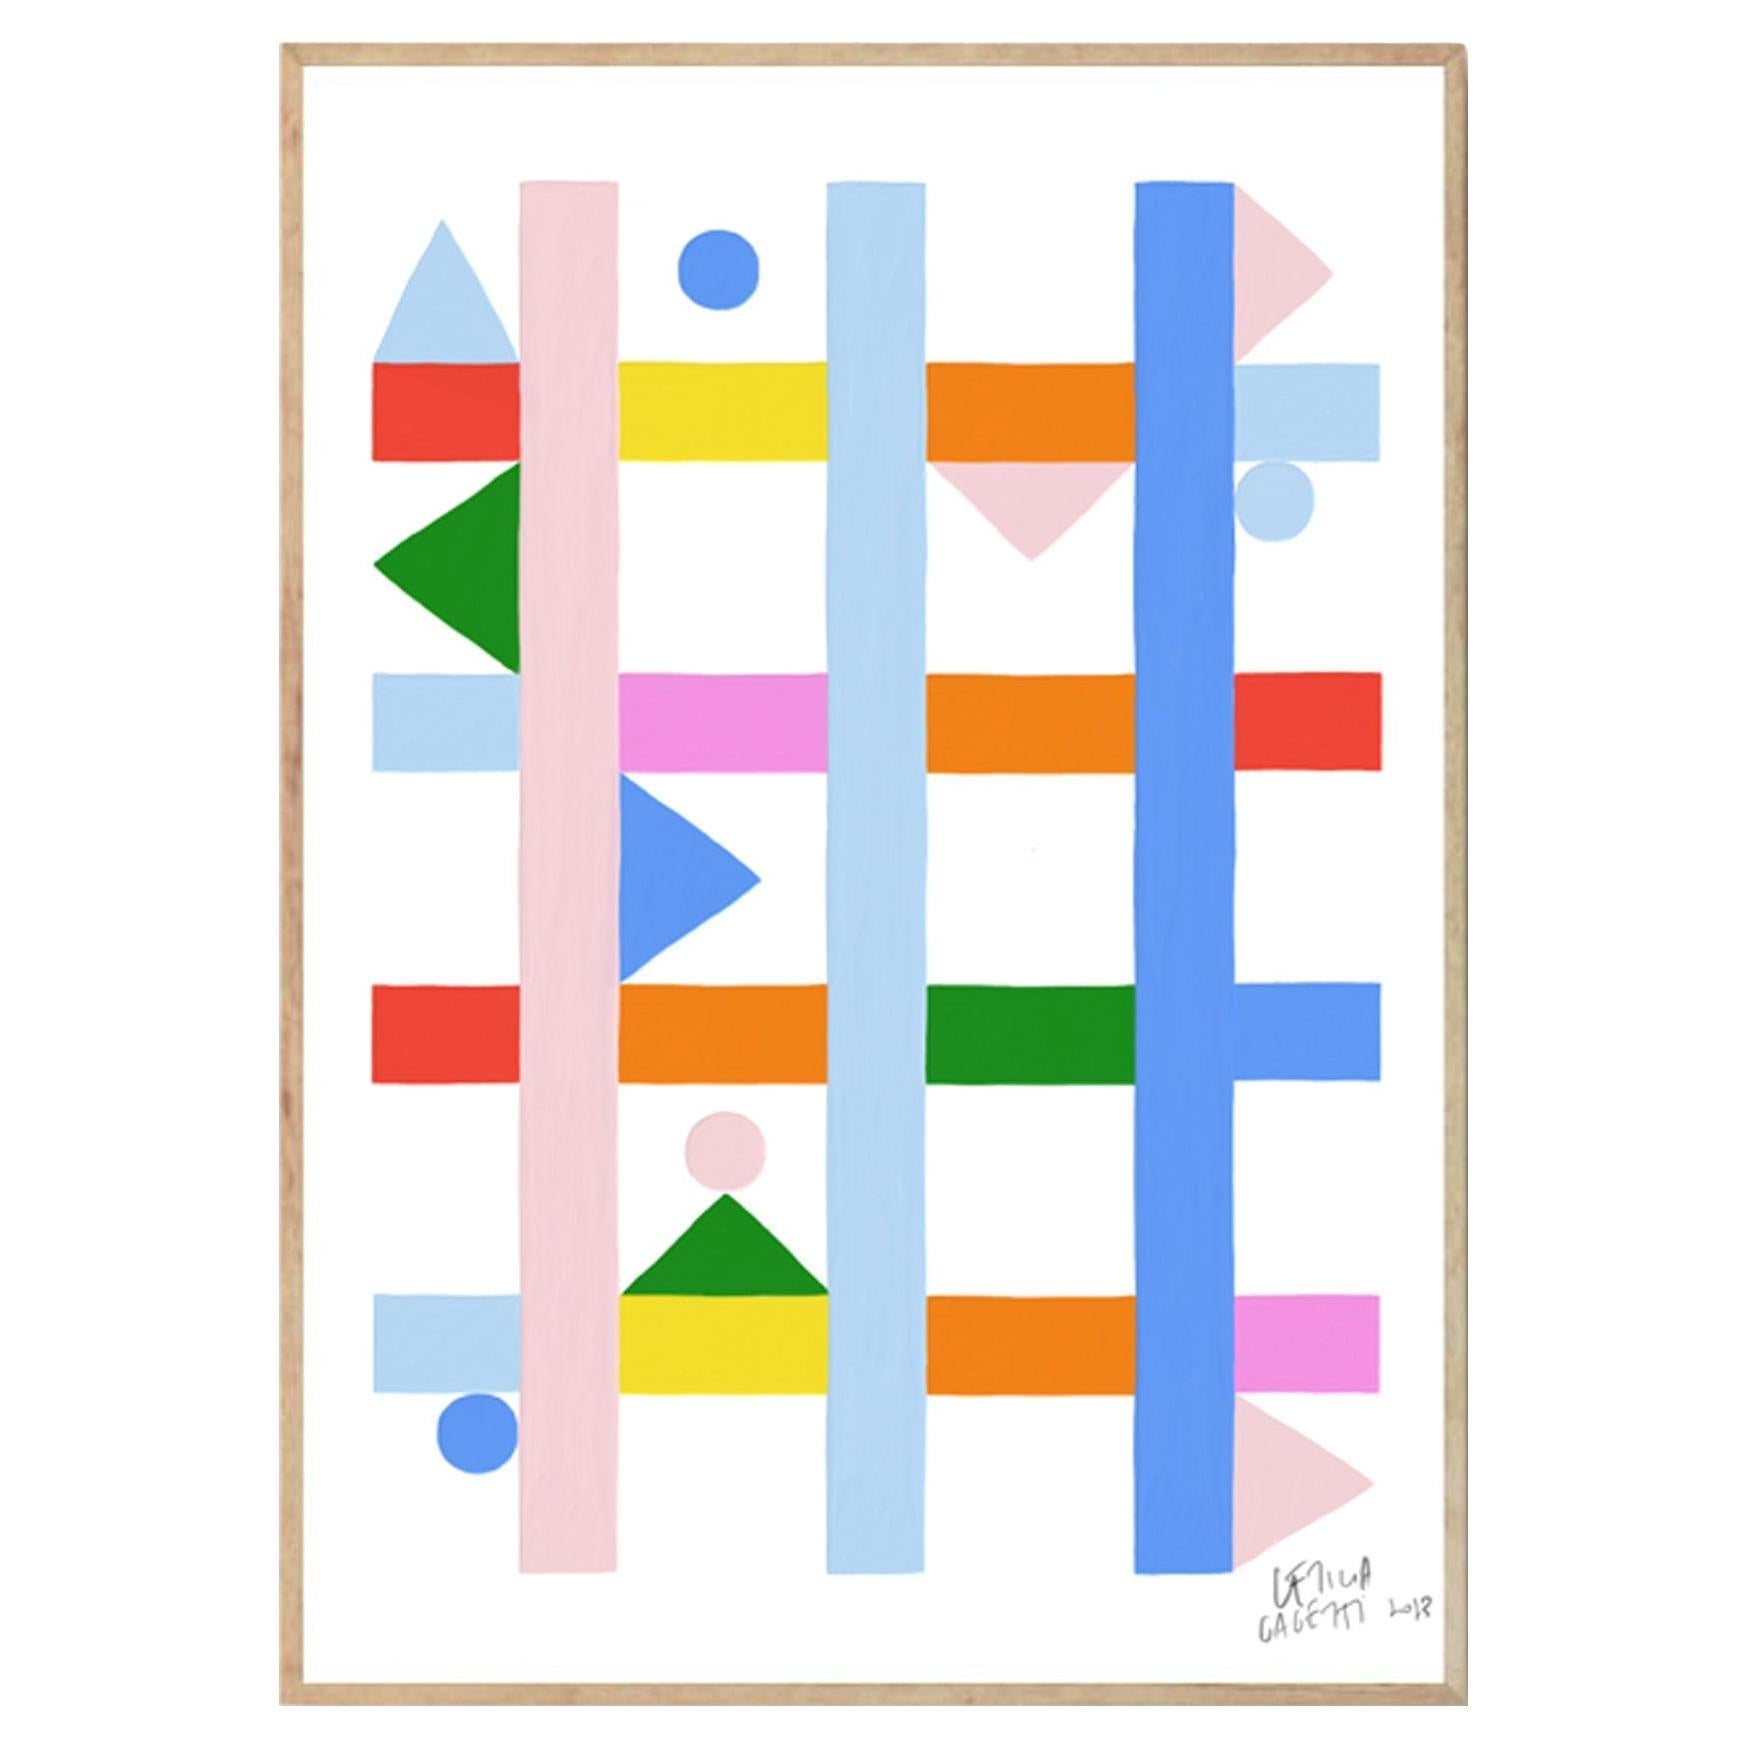 Estudios Geométricos Wall Art Print by Leticia Gagetti #05 - Multiple Sizes For Sale